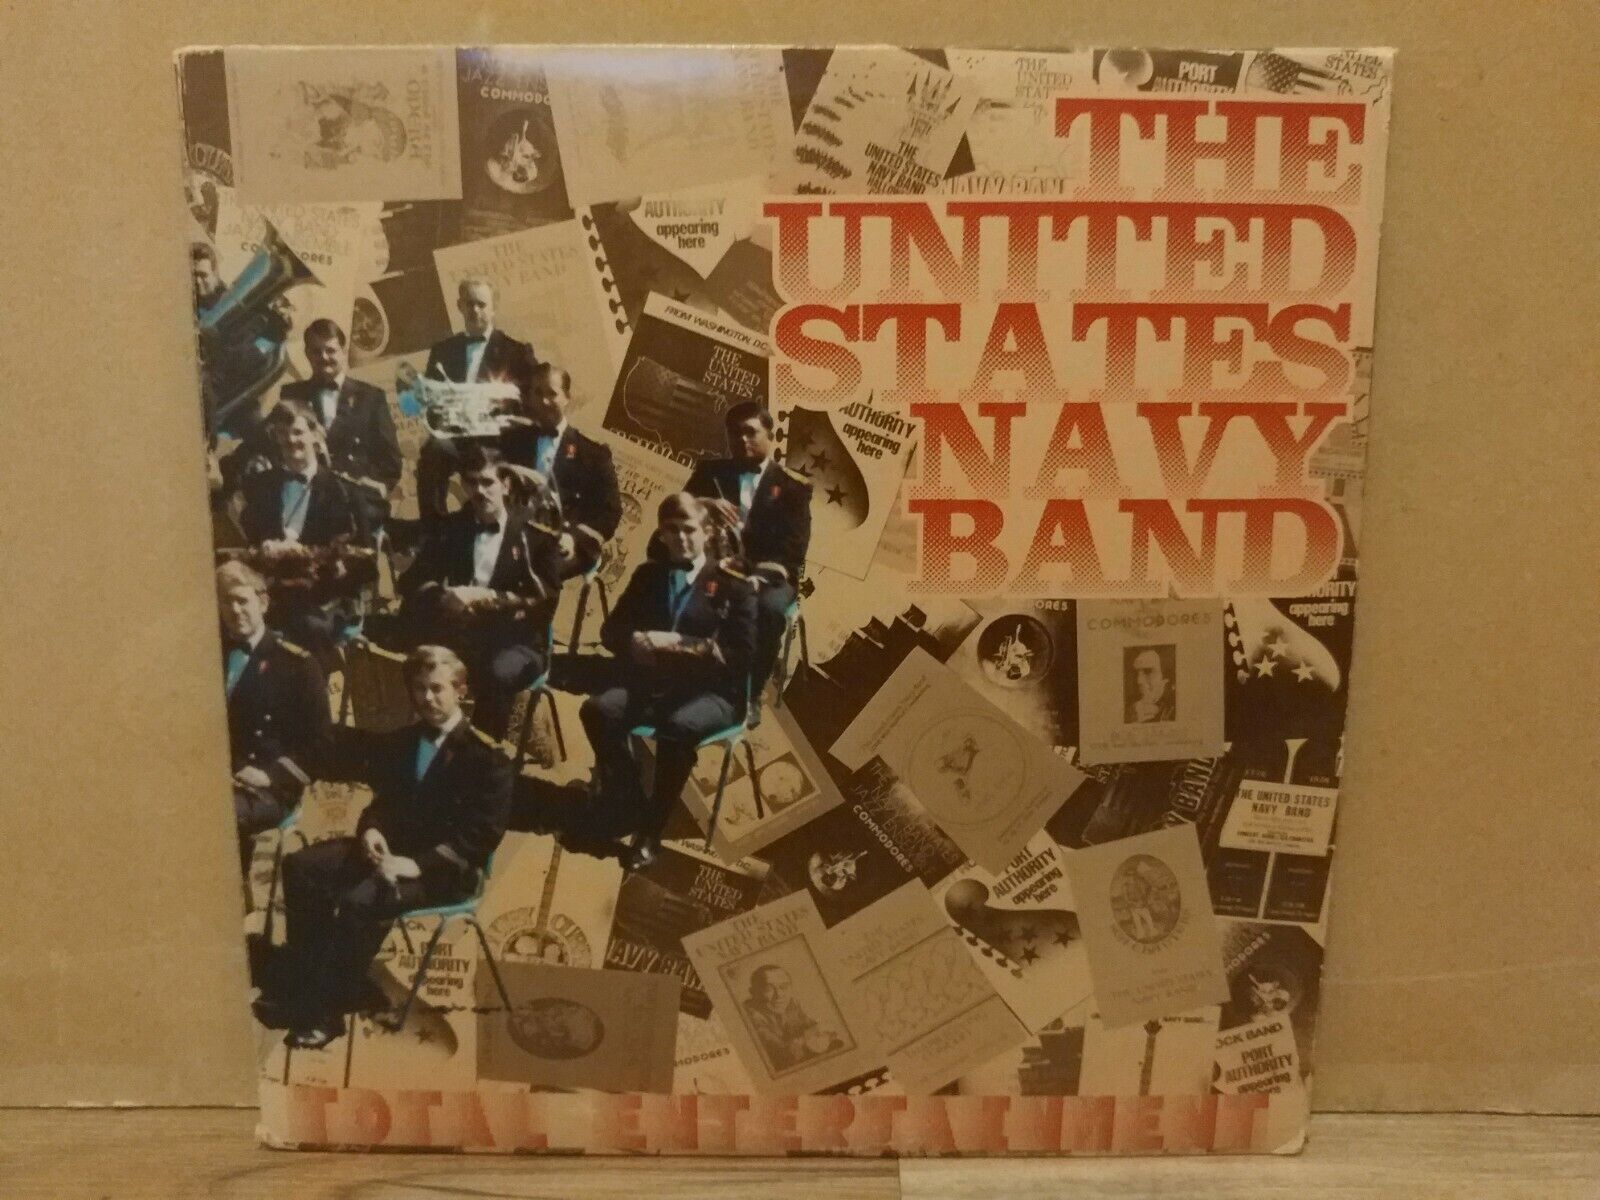 The United States Navy Band - Total Entertainment 3 LP Trifold Cover Exc Vinyl